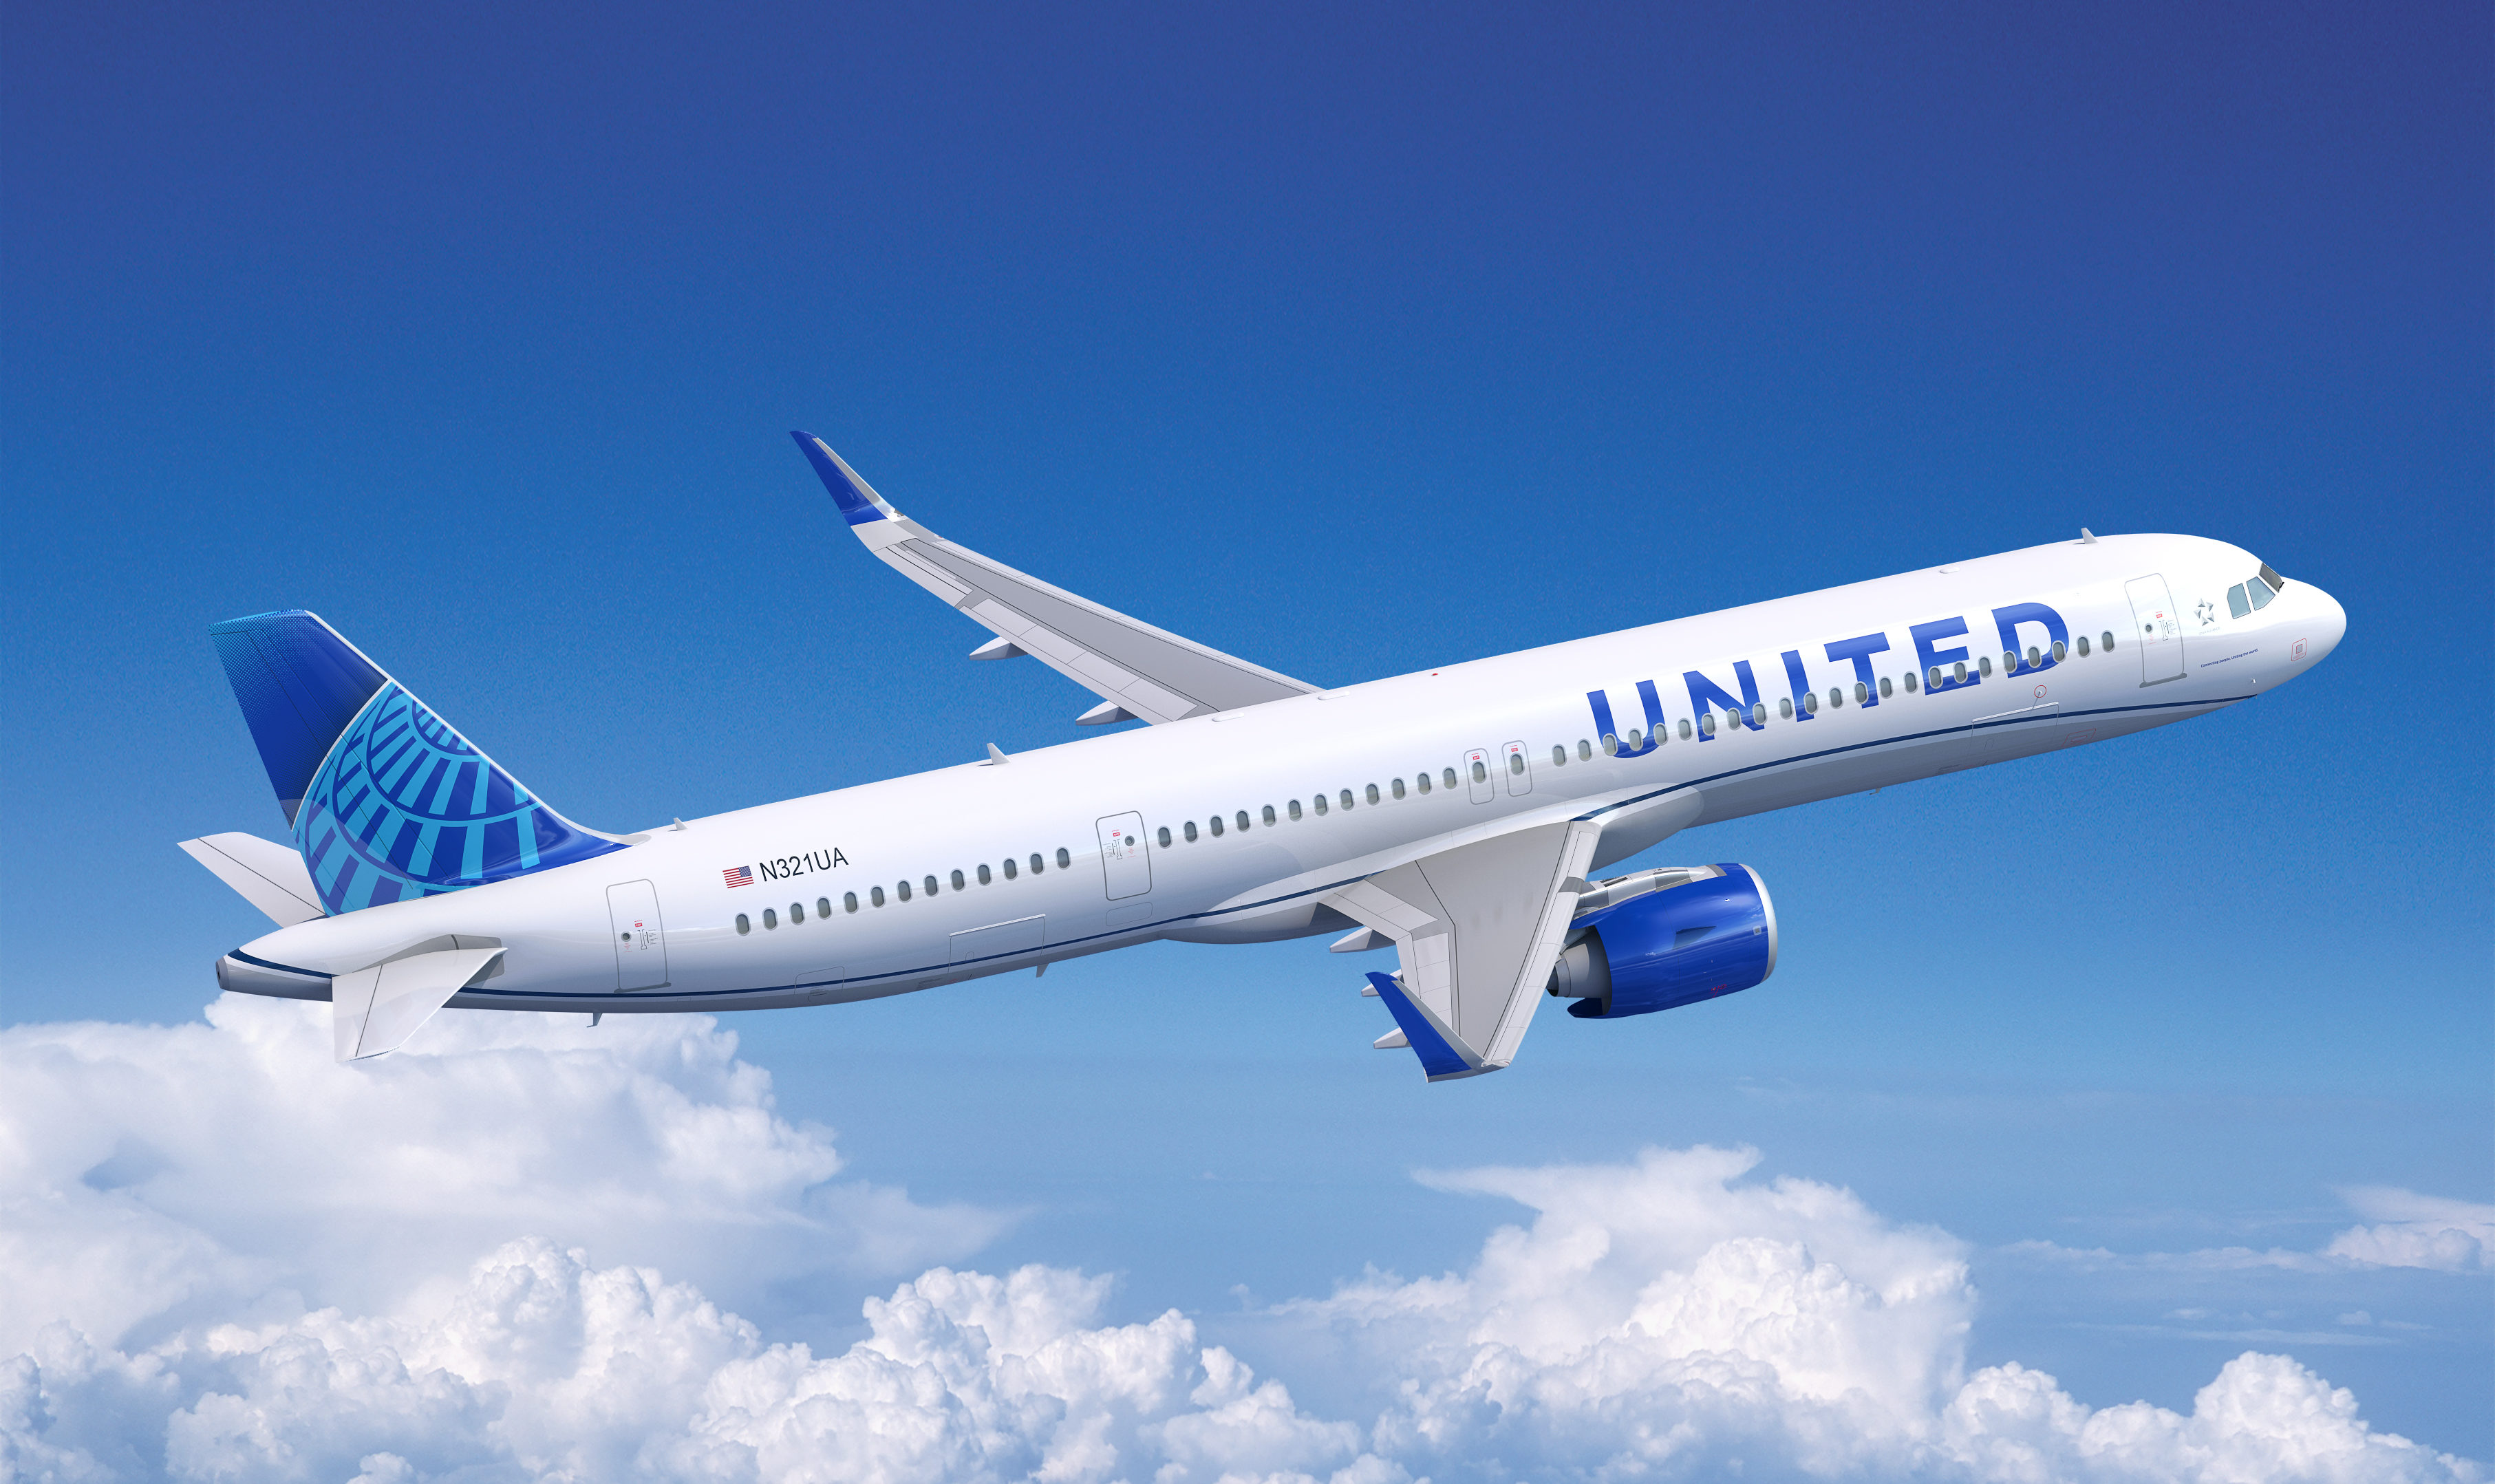 United Airlines adds 270 Airbus, Boeing aircraft to order book - Skies Mag